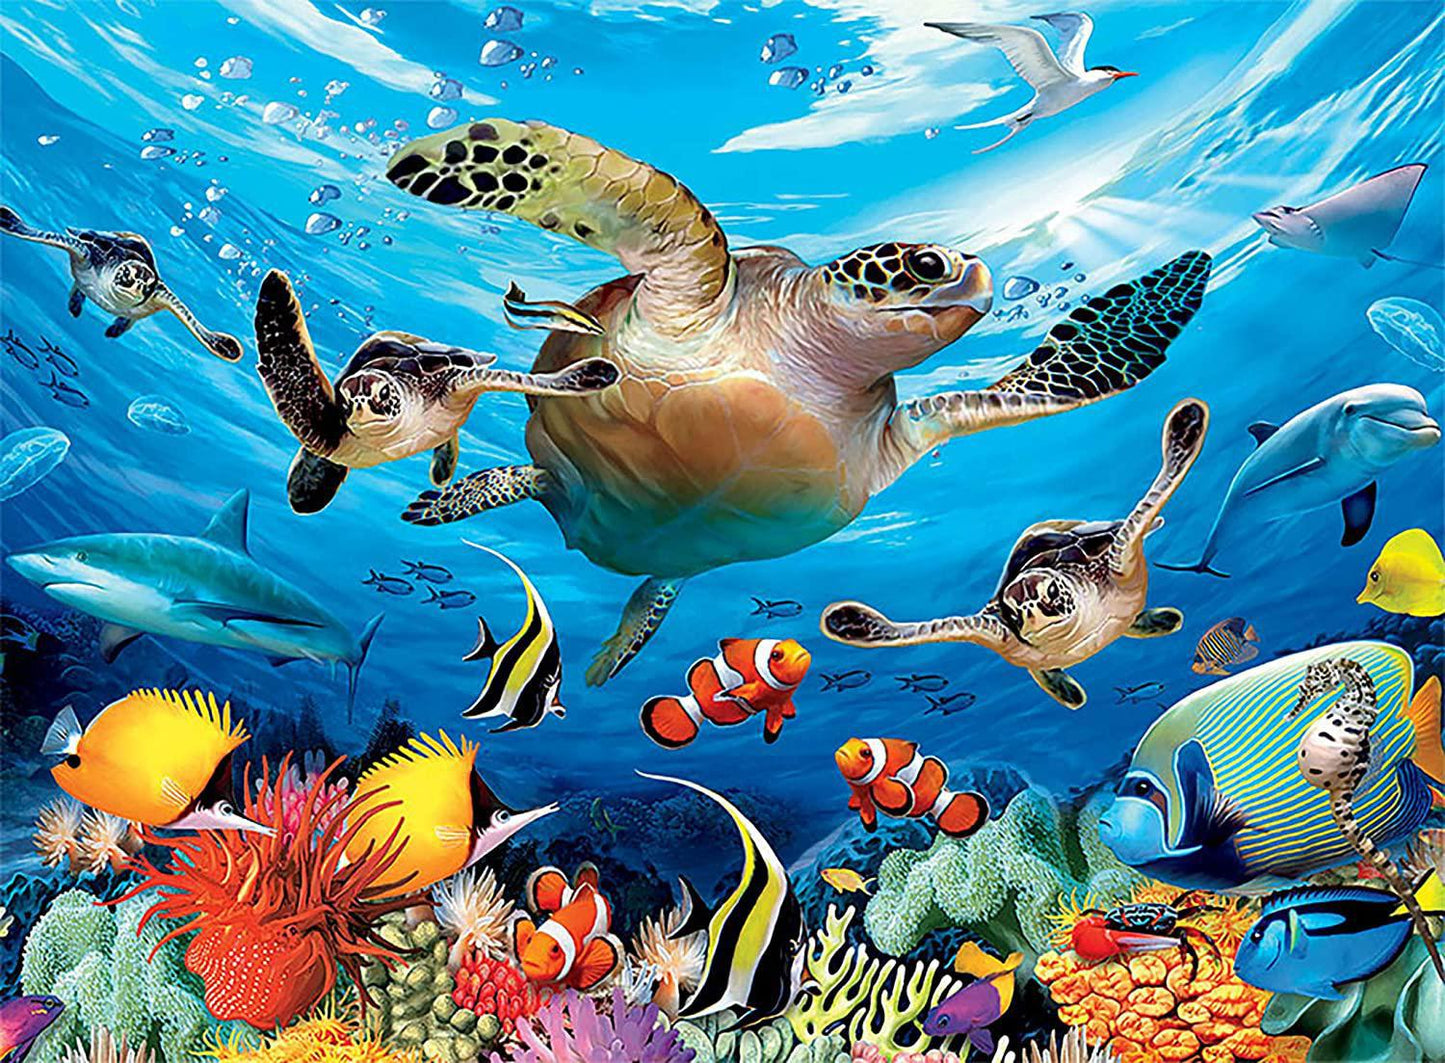 Ceaco Undersea Glow In The Dark  Journey of The Sea Turtles Jigsaw Puzzle